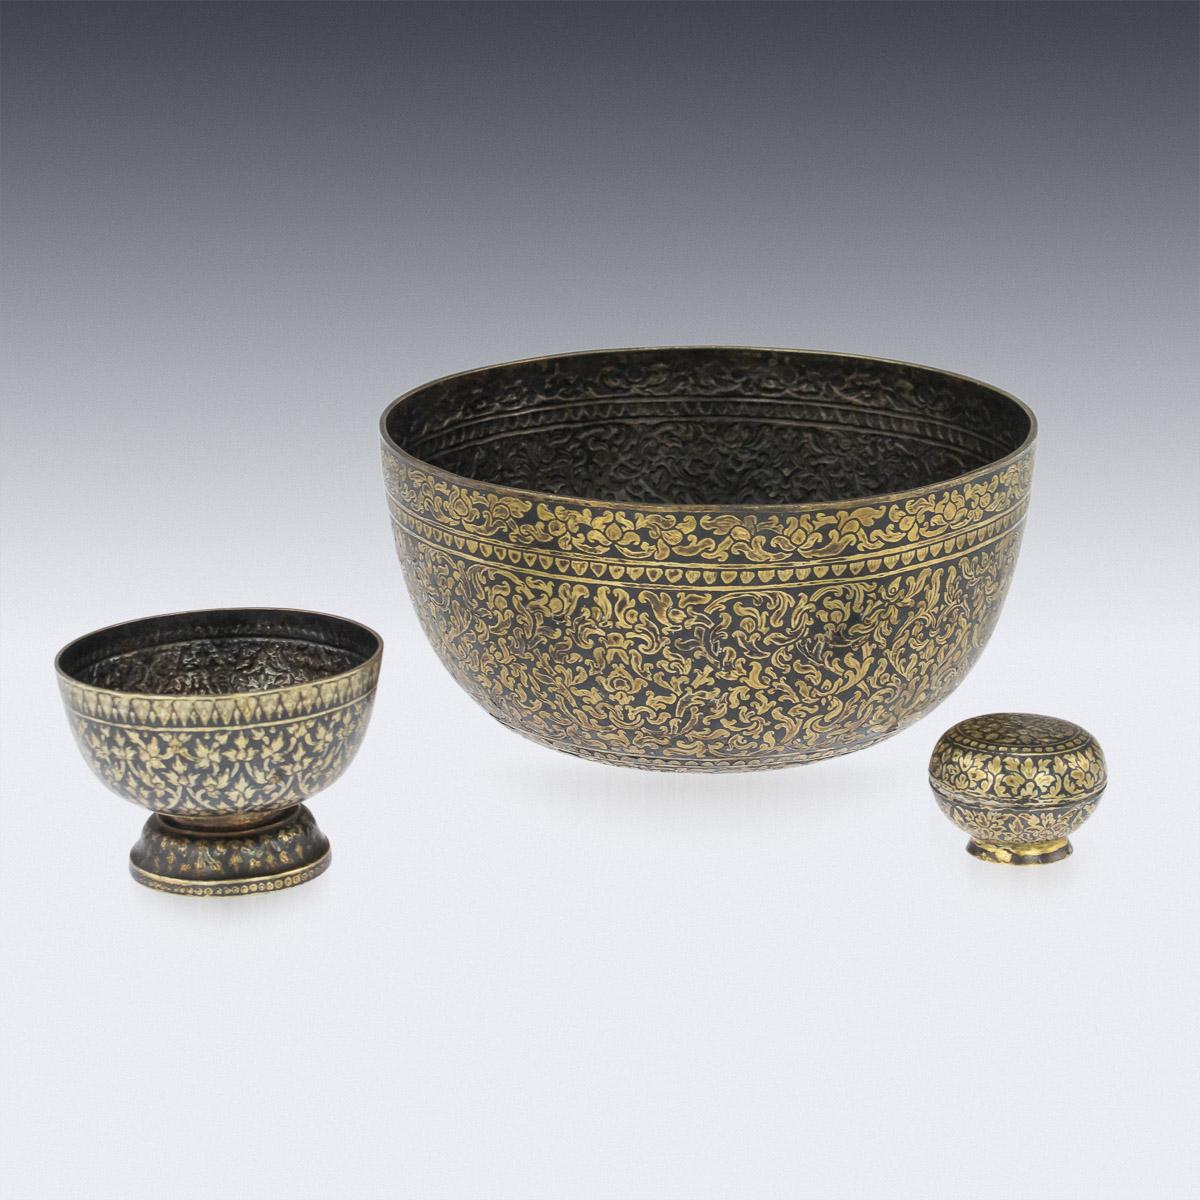 Antique mid-19th century Thai extremely rare and fine set of solid silver niello bowls, of various sizes, these betel leaf holders, with engraved gilt floral and foliate decoration, come in a set of three and the smallest bowl set with a lid.